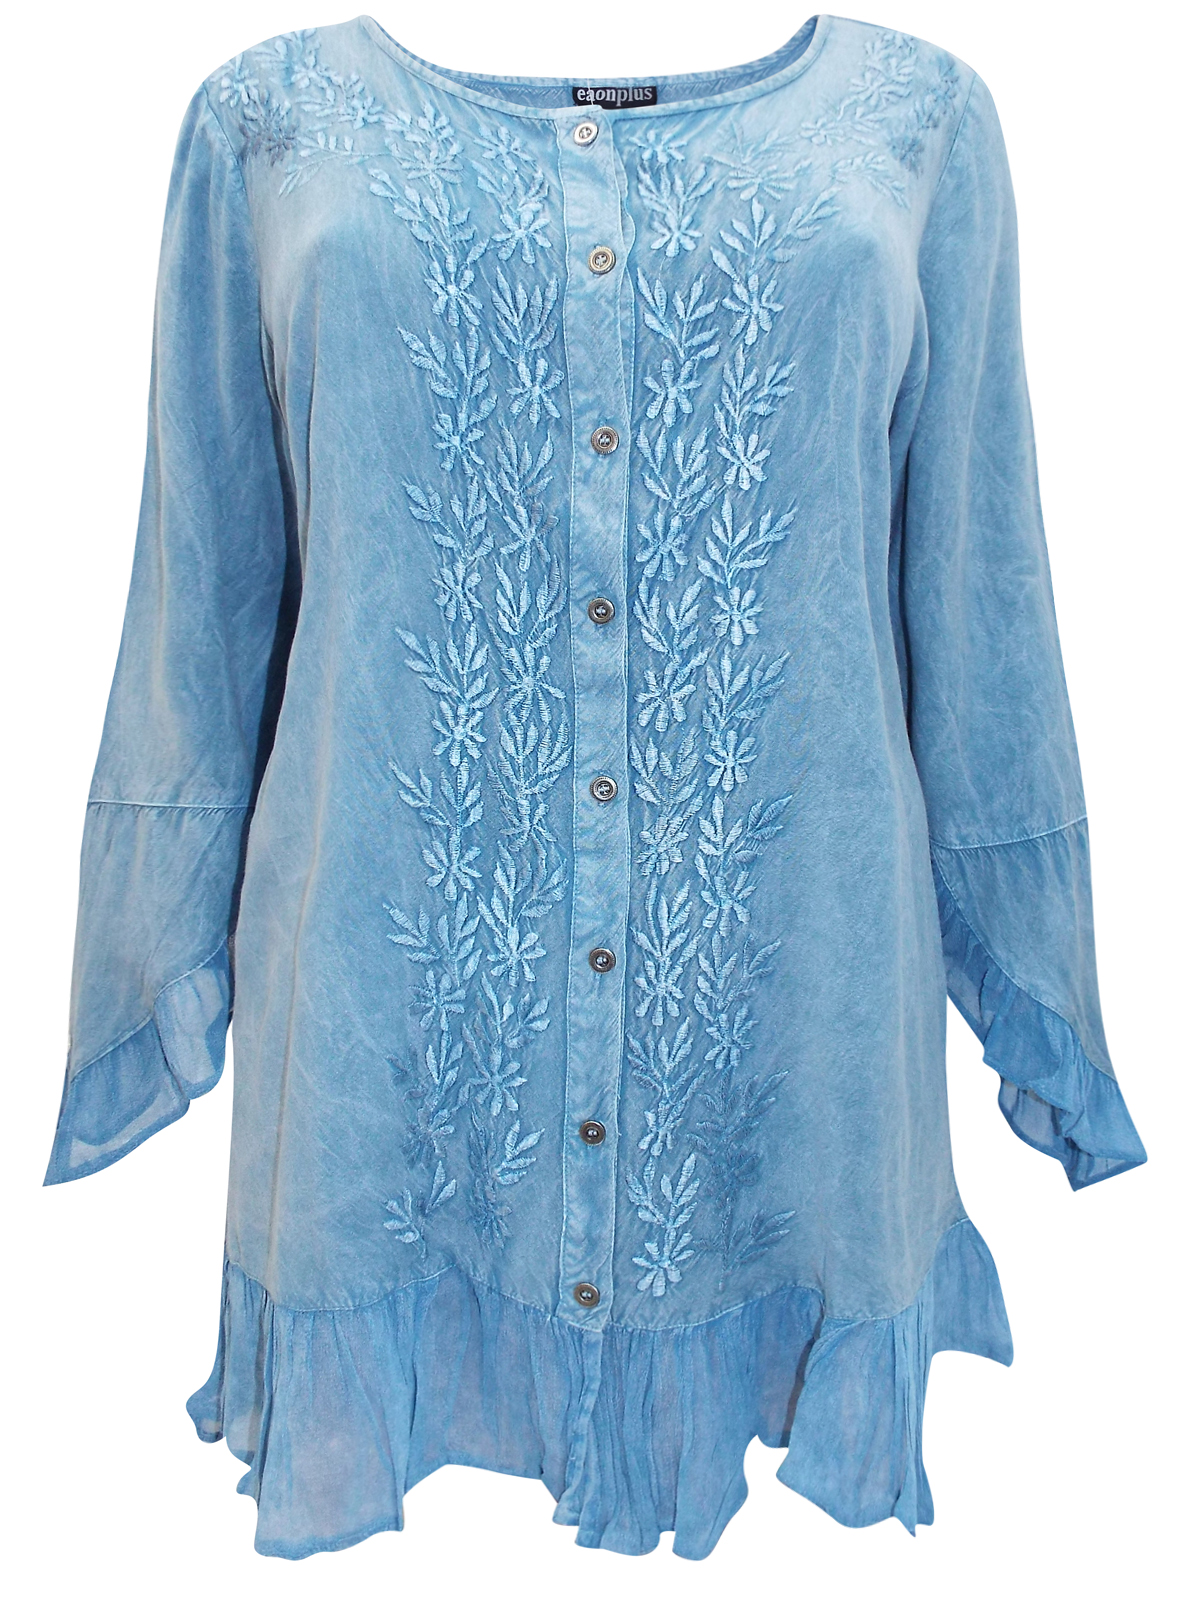 eaonplus DENIM Enchanted Pixie Embroidered Blouse - Plus Size 18/20 to